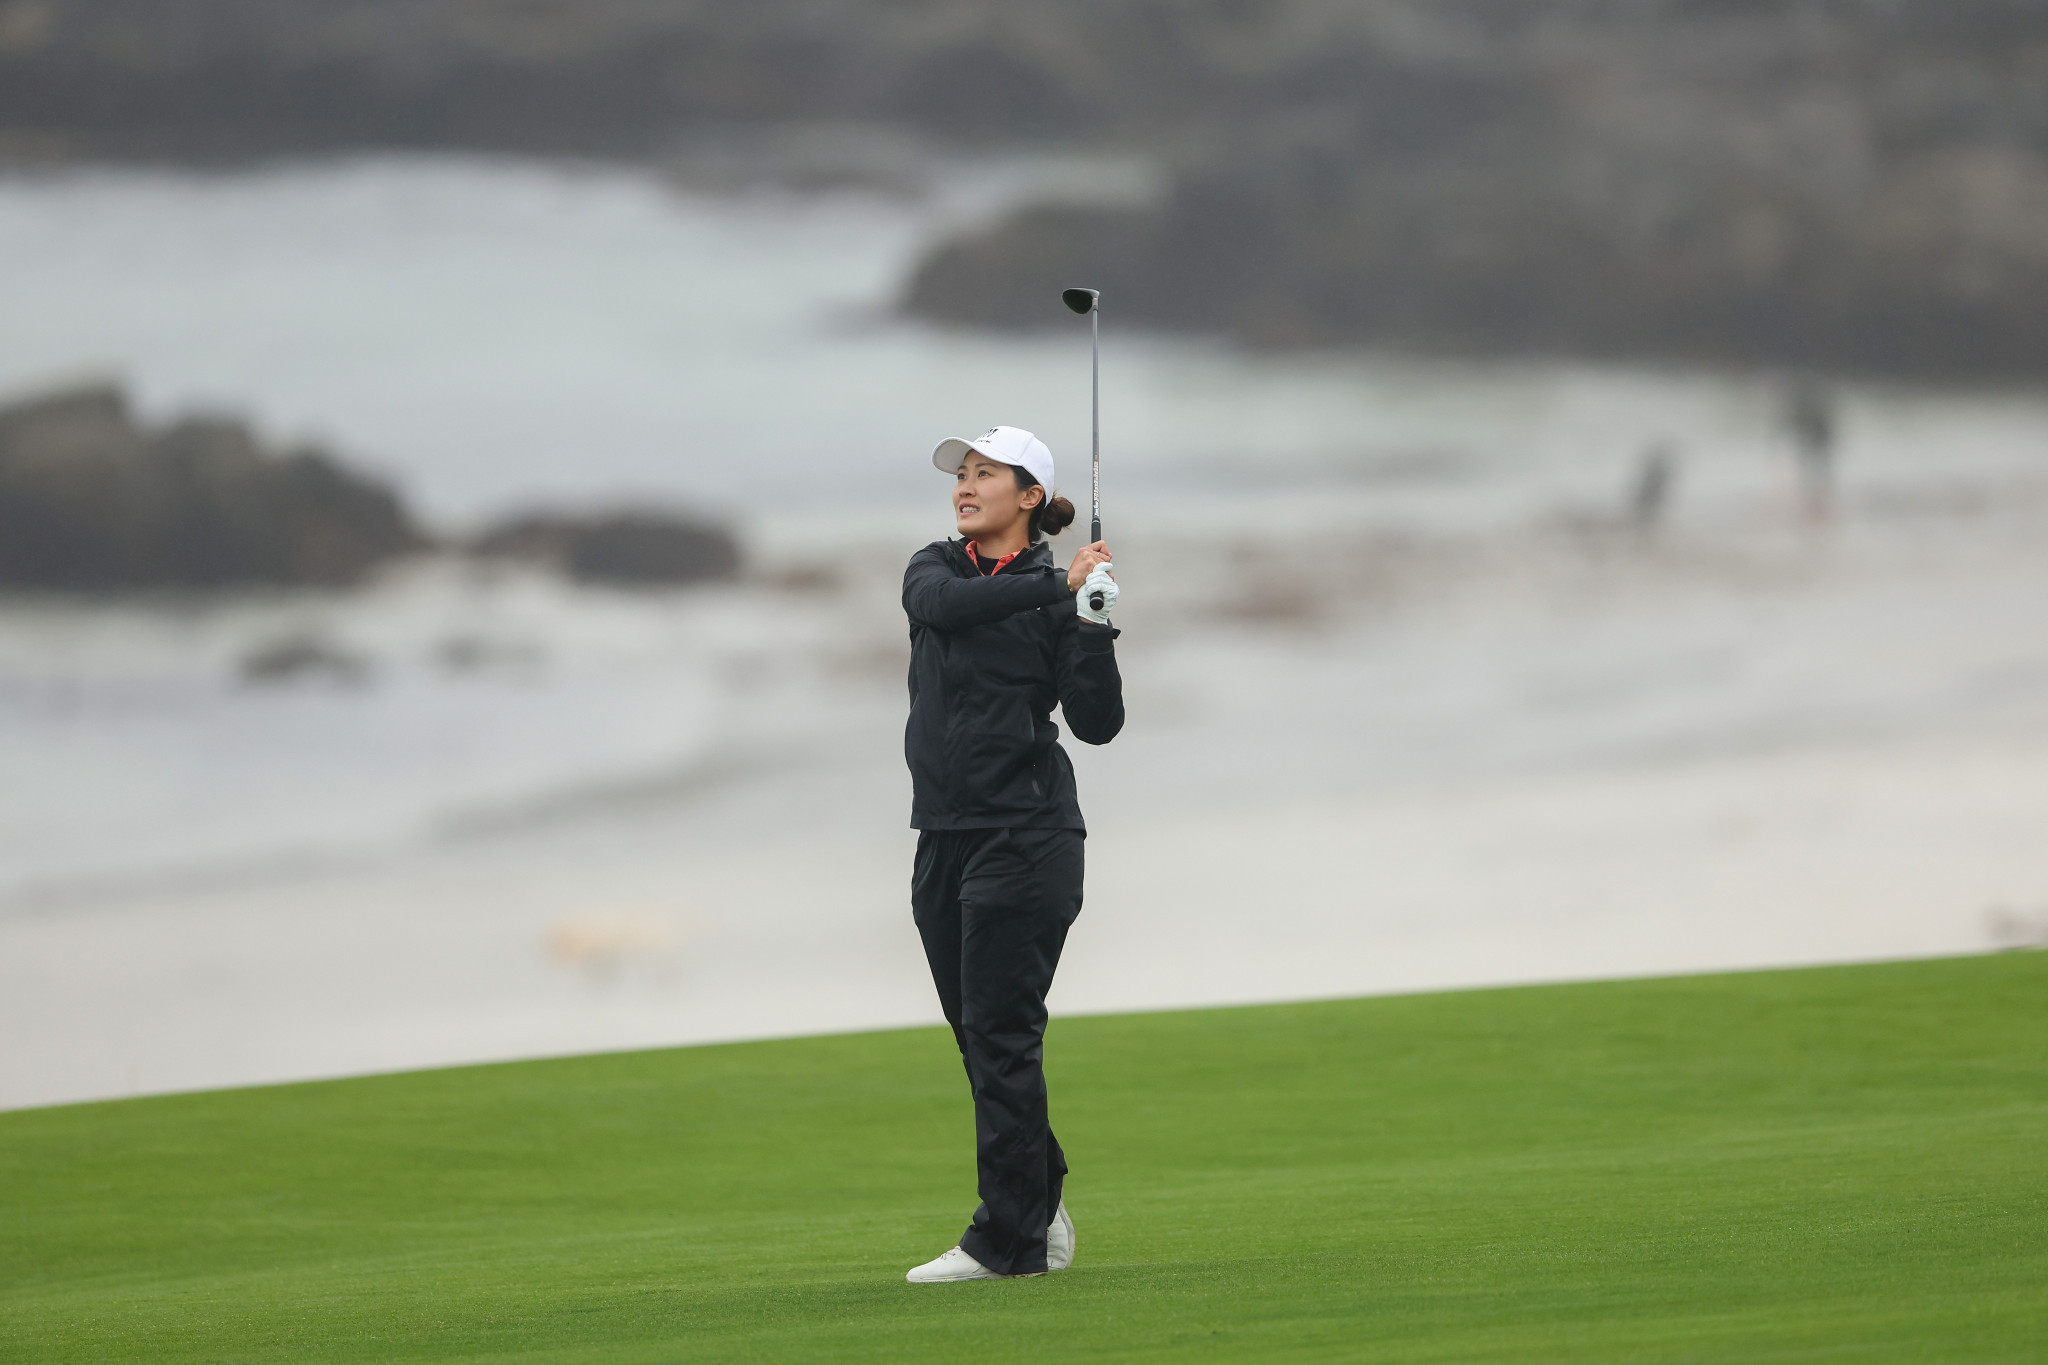 China's Xiyu Lin shares the joint lead at the end of the first round of the U.S.Open after shooting 68 at Pebble Beach in California ©Getty Images